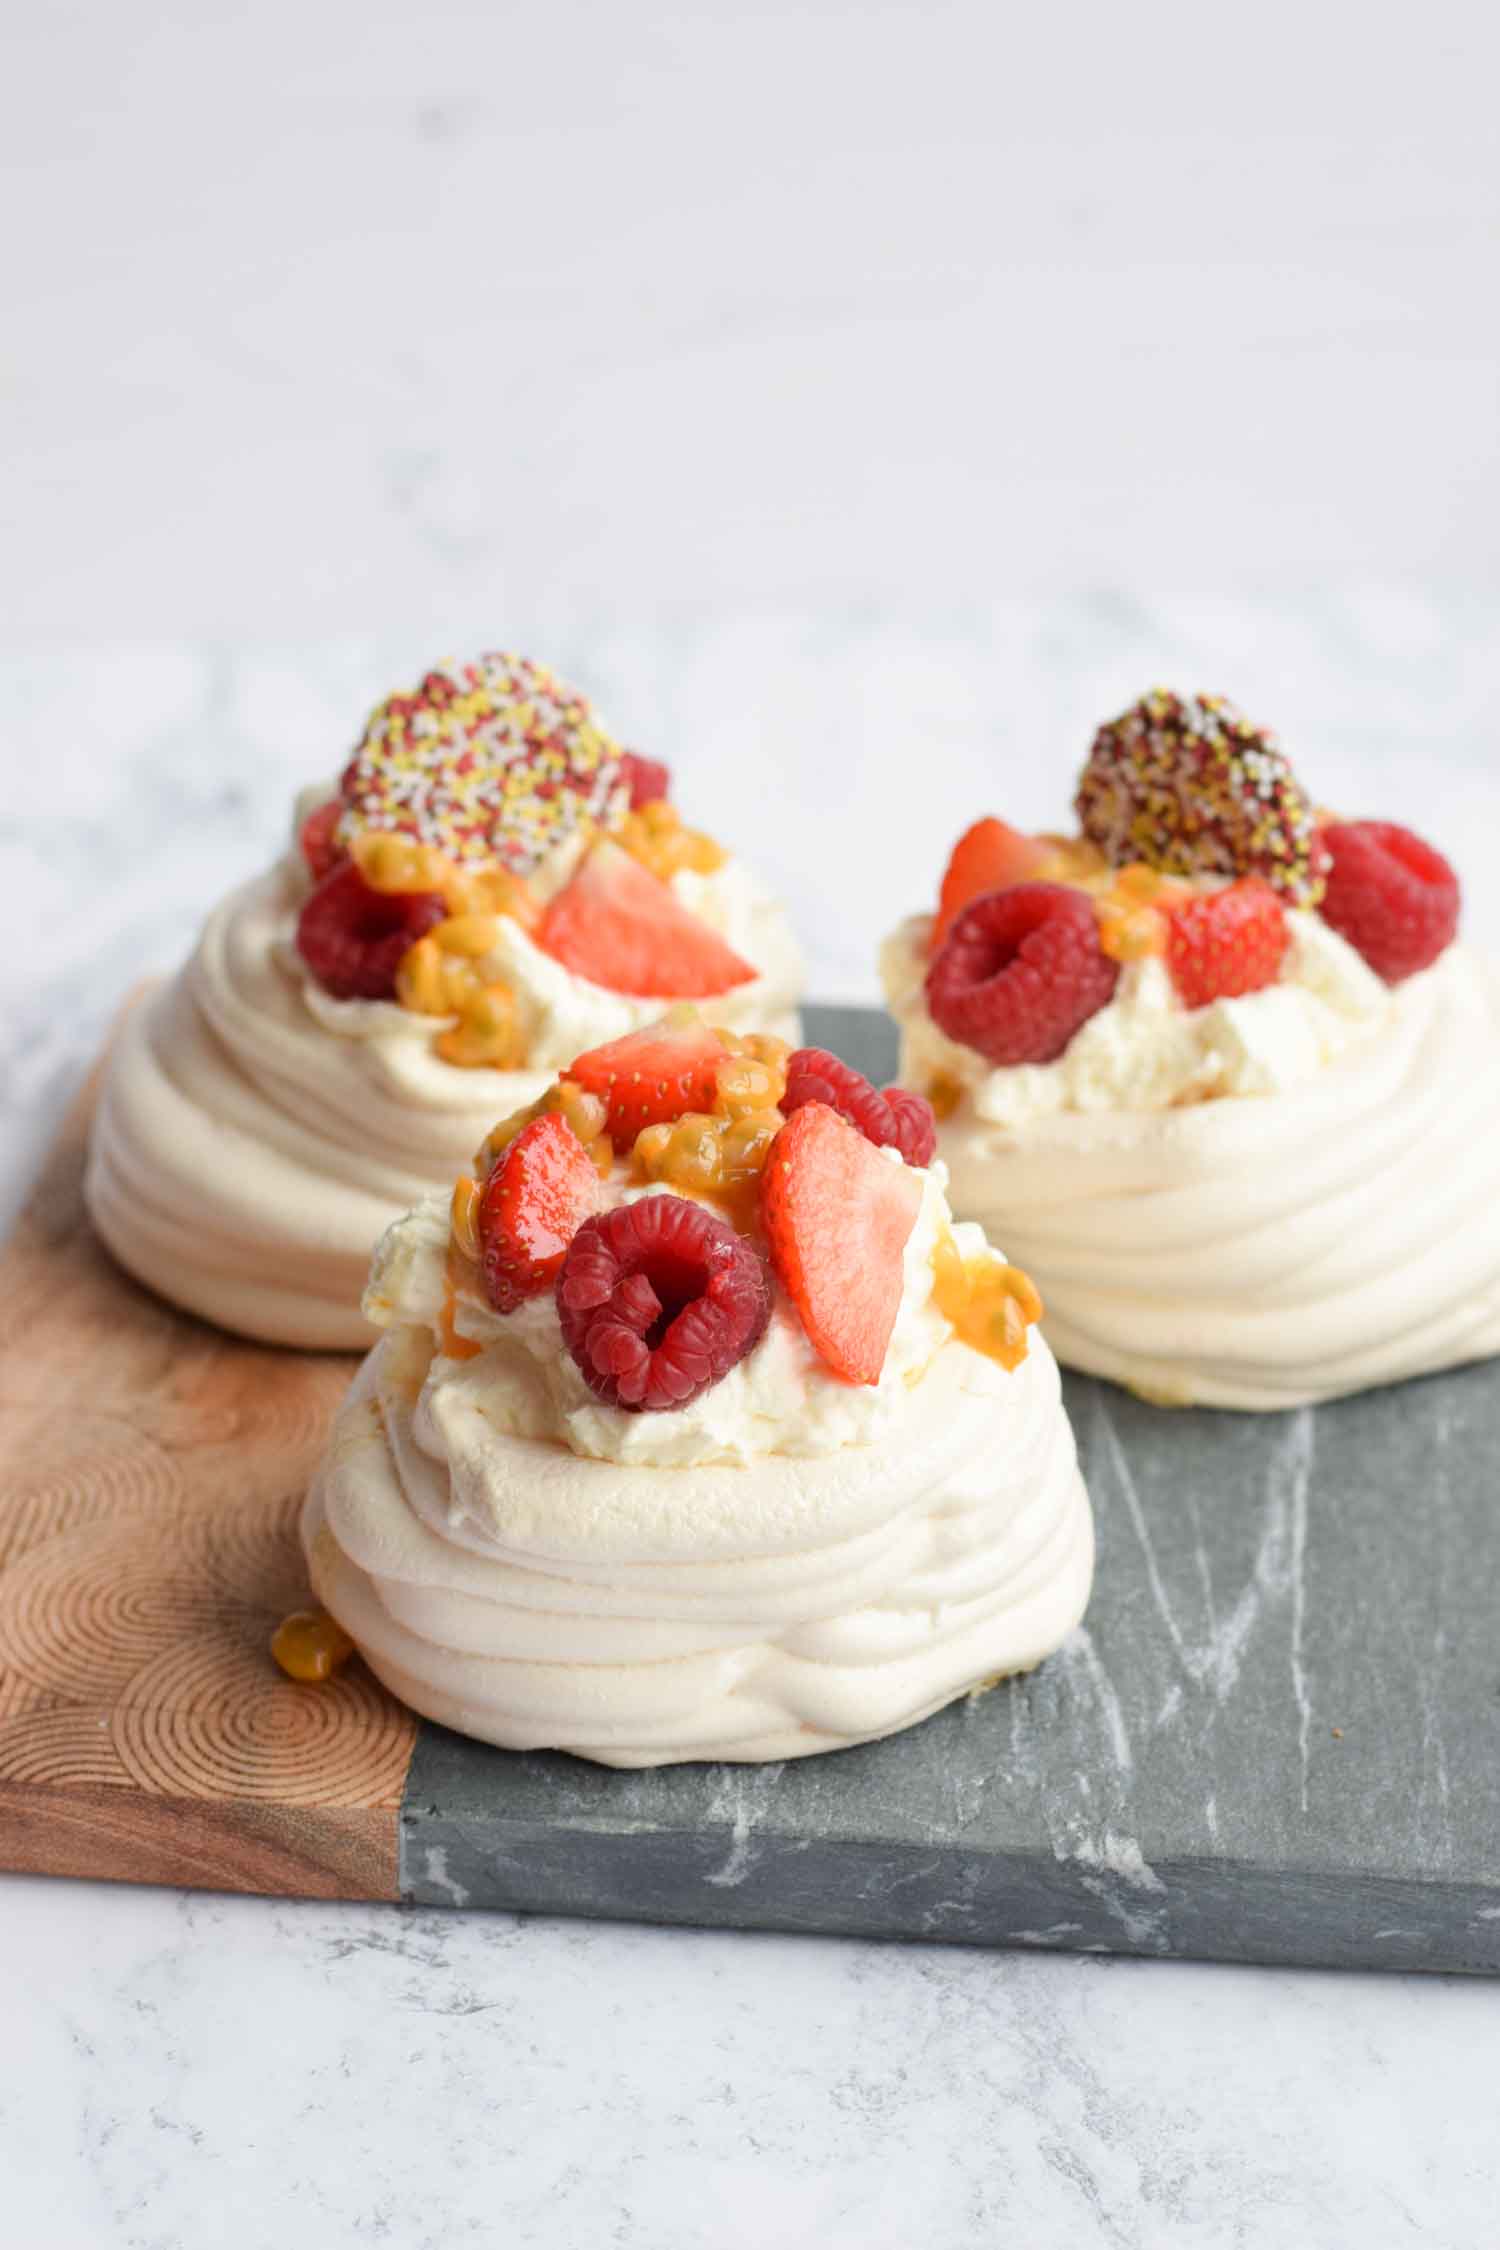 Three low FODMAP mini pavlovas with red fruits and cream